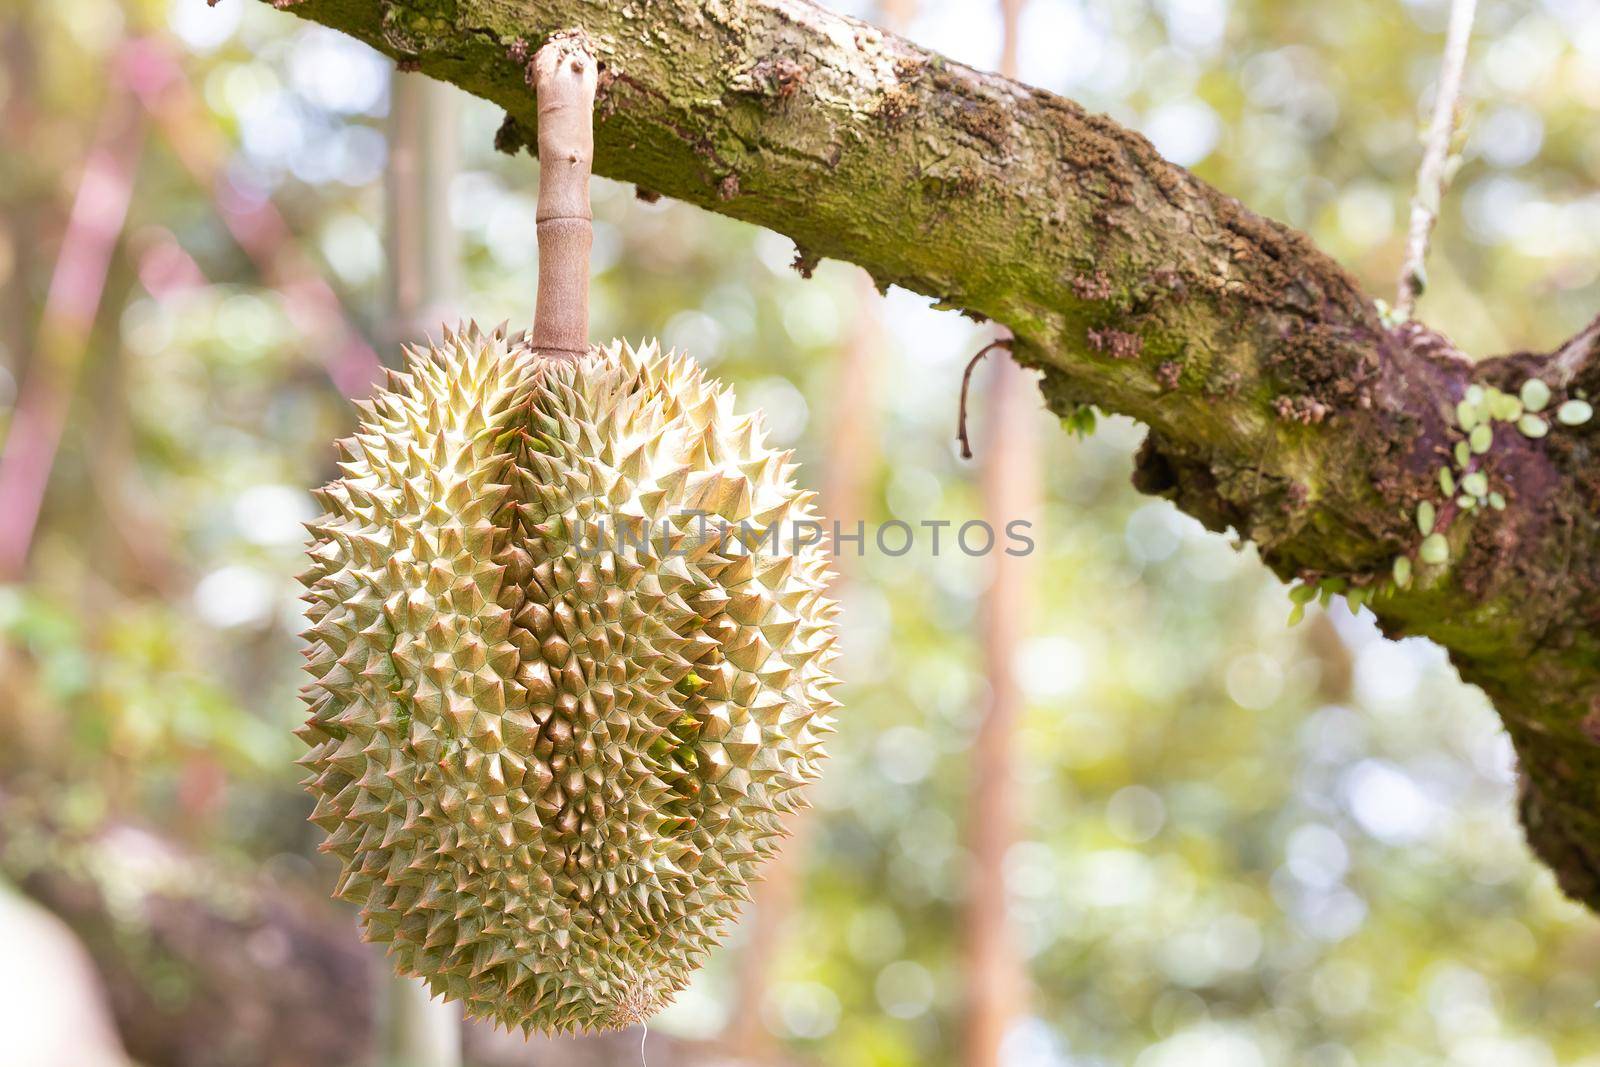 Monthong durian on tree, King of fruit from Thailand